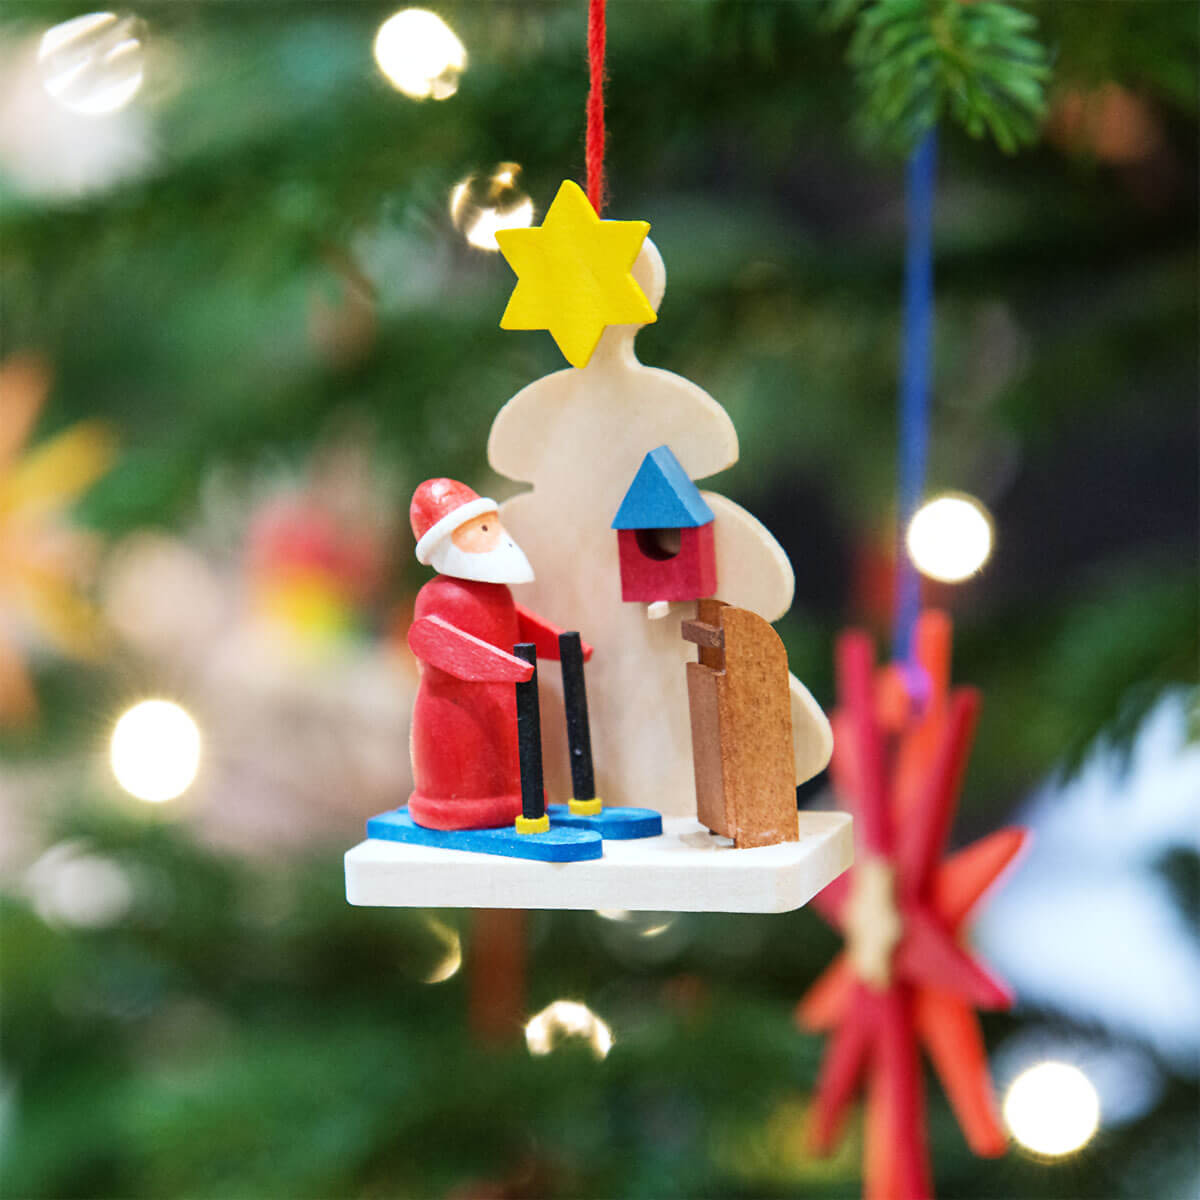 Tree 'Santa Claus' Ornament with sewing machine